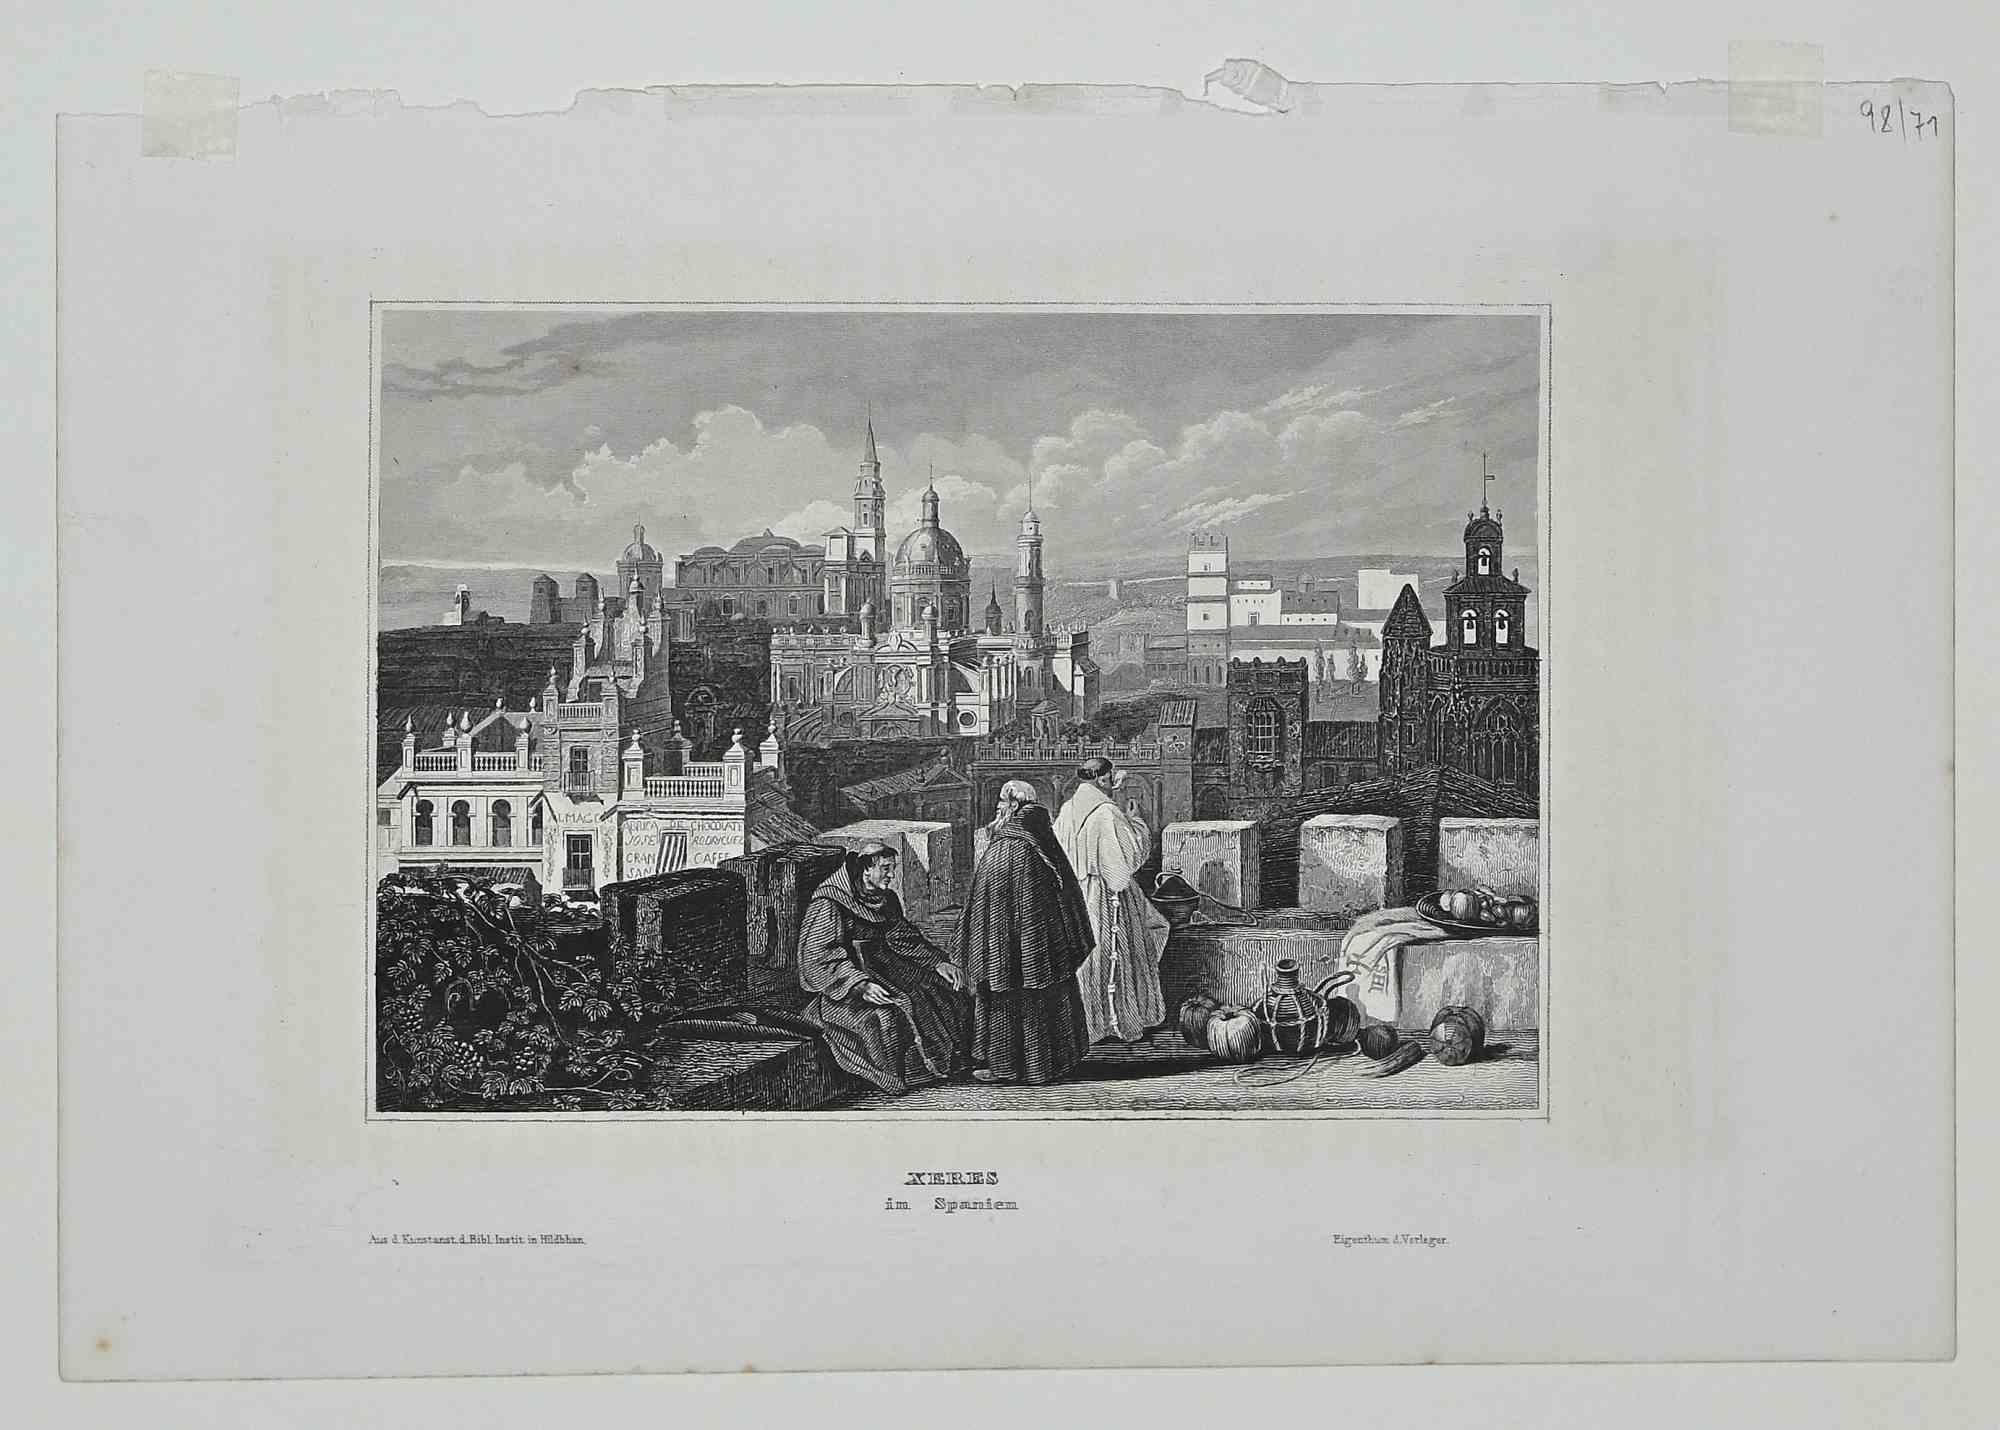 The View of Xeres in Spain is an original lithograph on paper realized by Eigenthum d. Verleger in The 19th Century.

Signed on the plate on the lower right corner.

Original lithograph on paper. 

Titled on the lower center.

Passepartout included